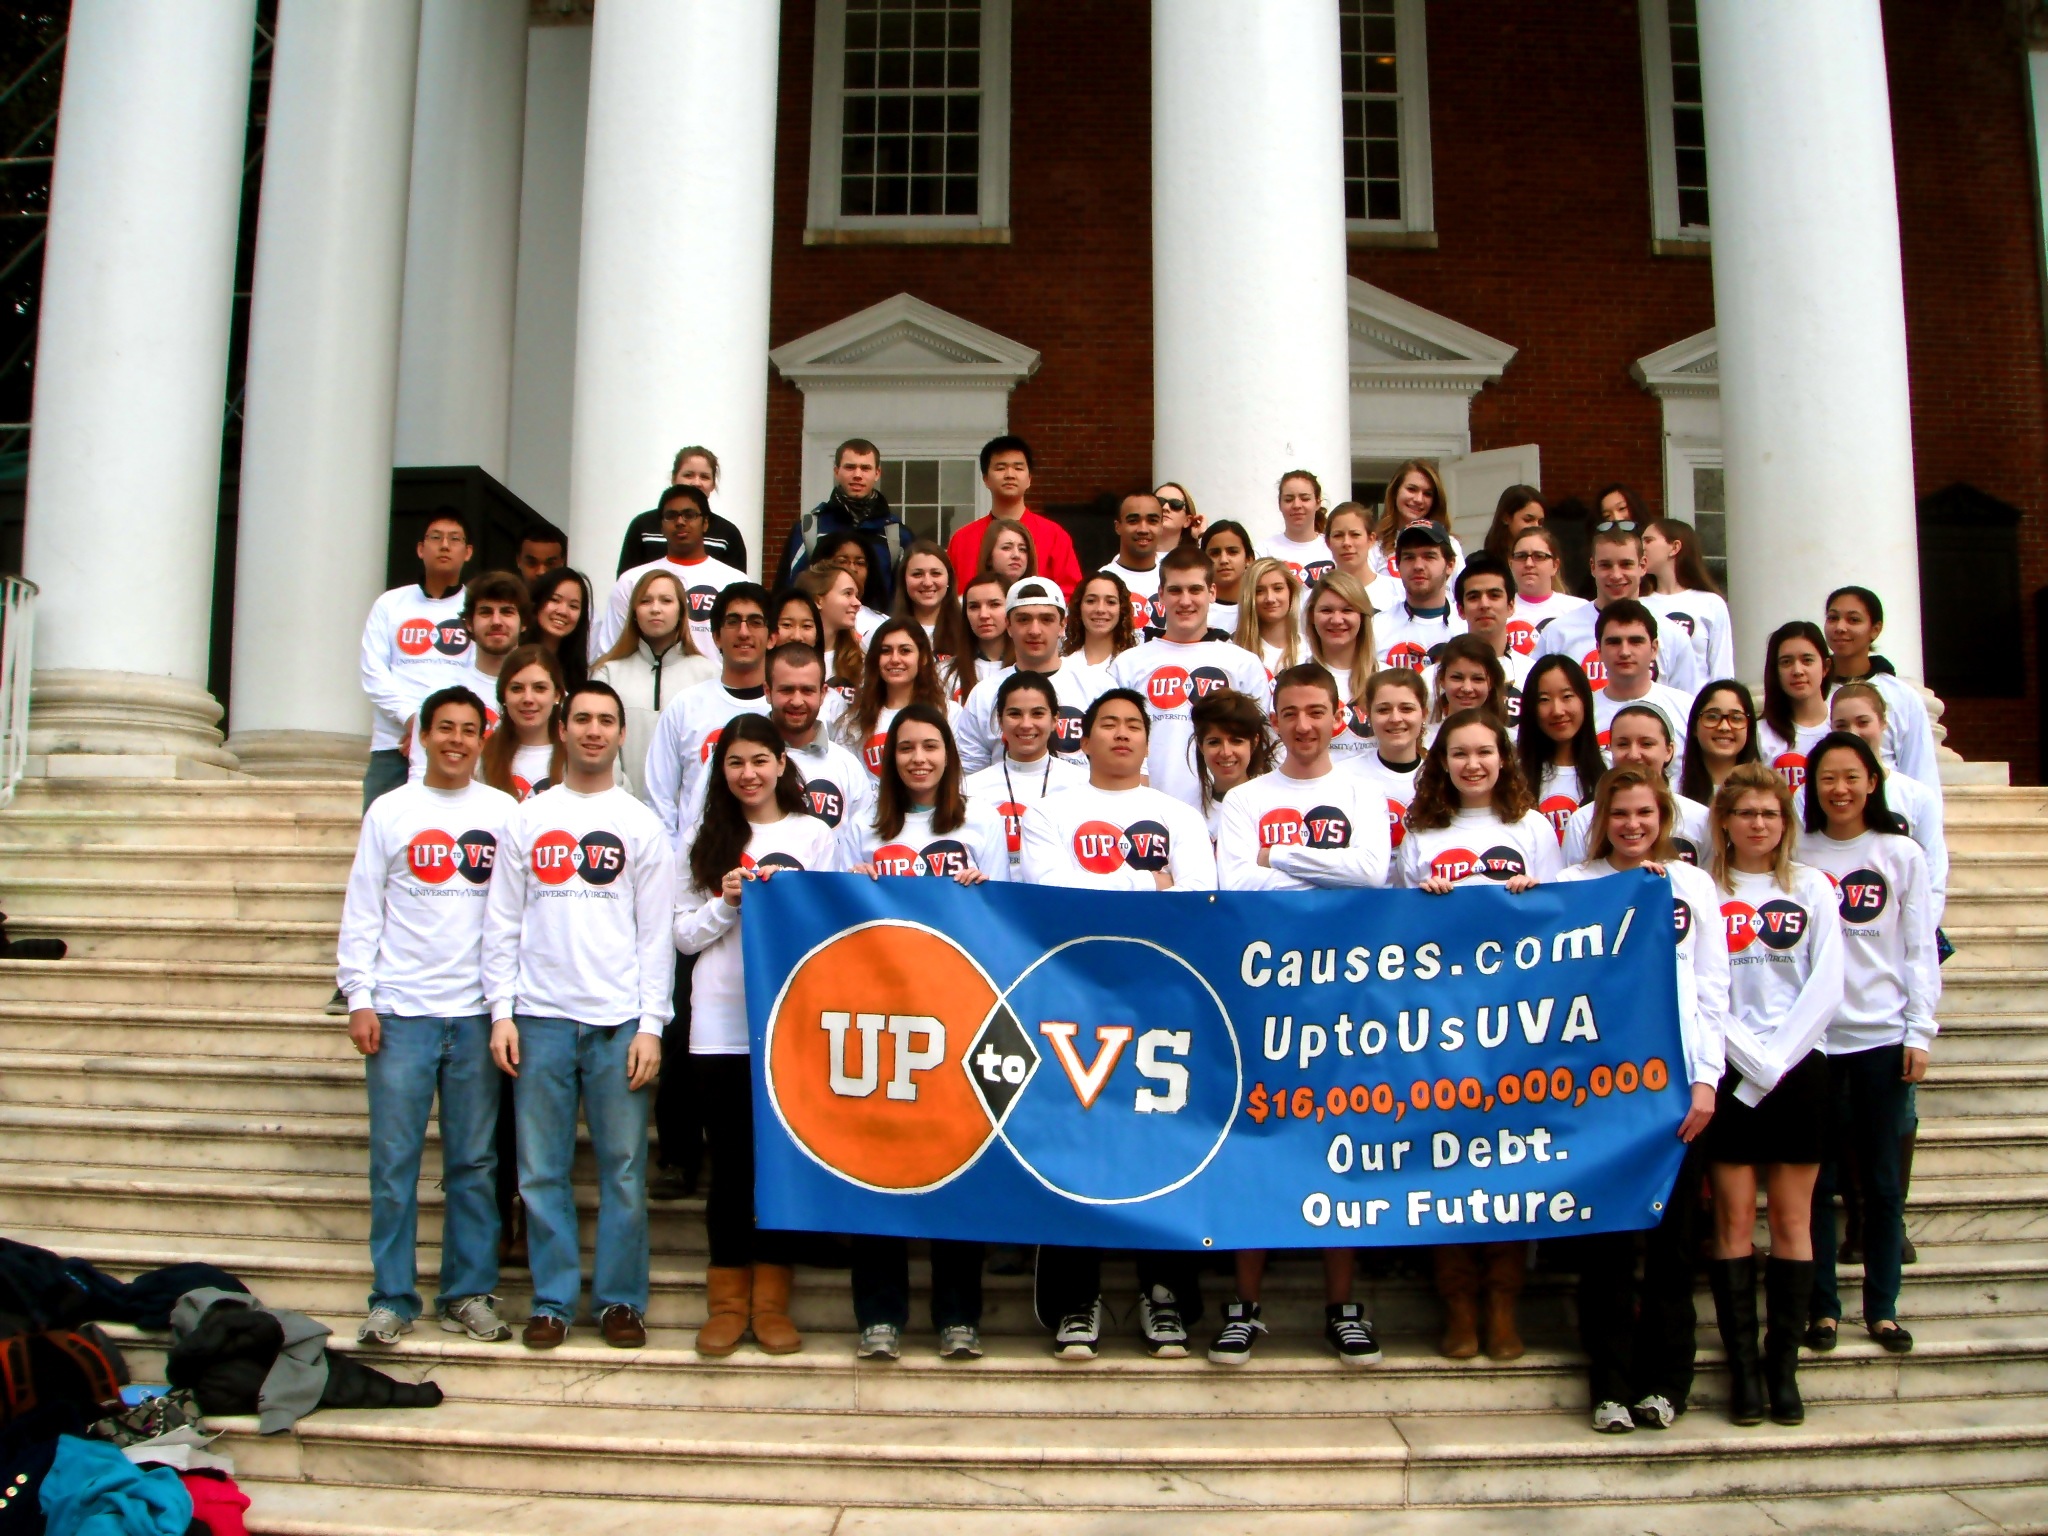 Group photo on the steps of the Rotunda